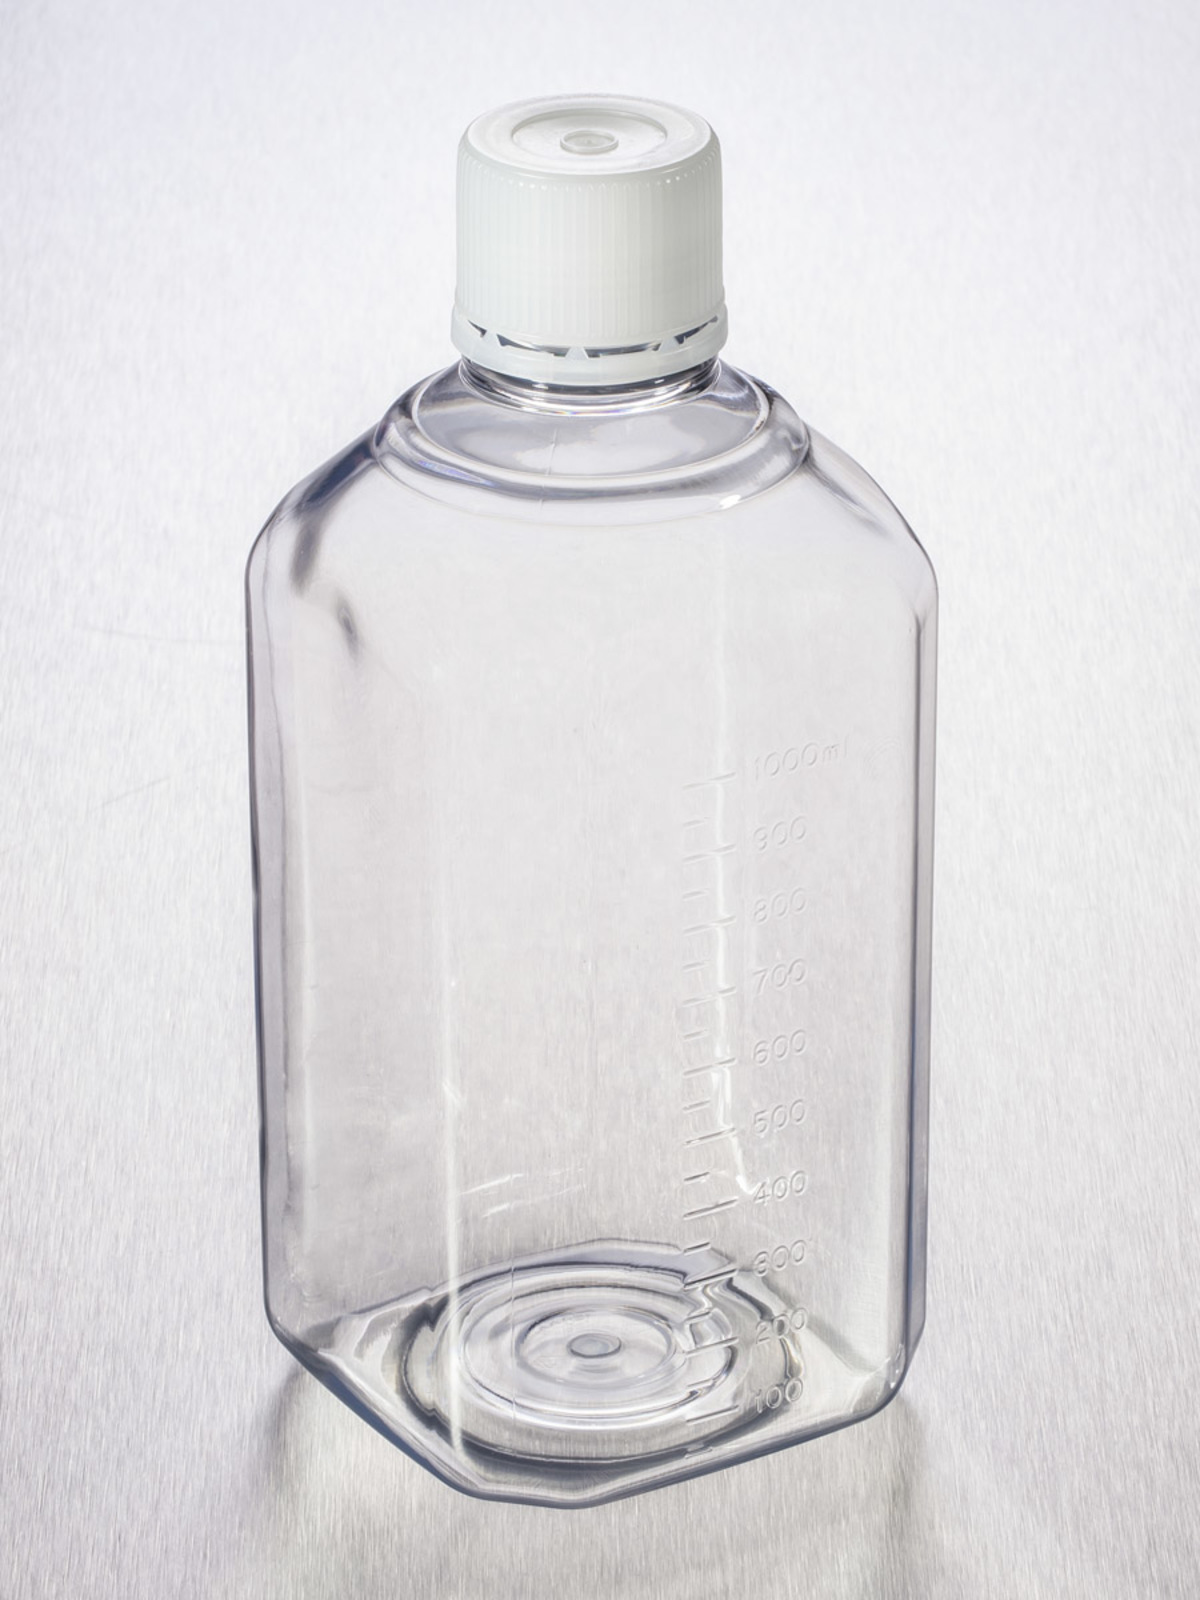 1 Liter Glass Bottles with Cap Manufacturers - Buy 1 liter glass